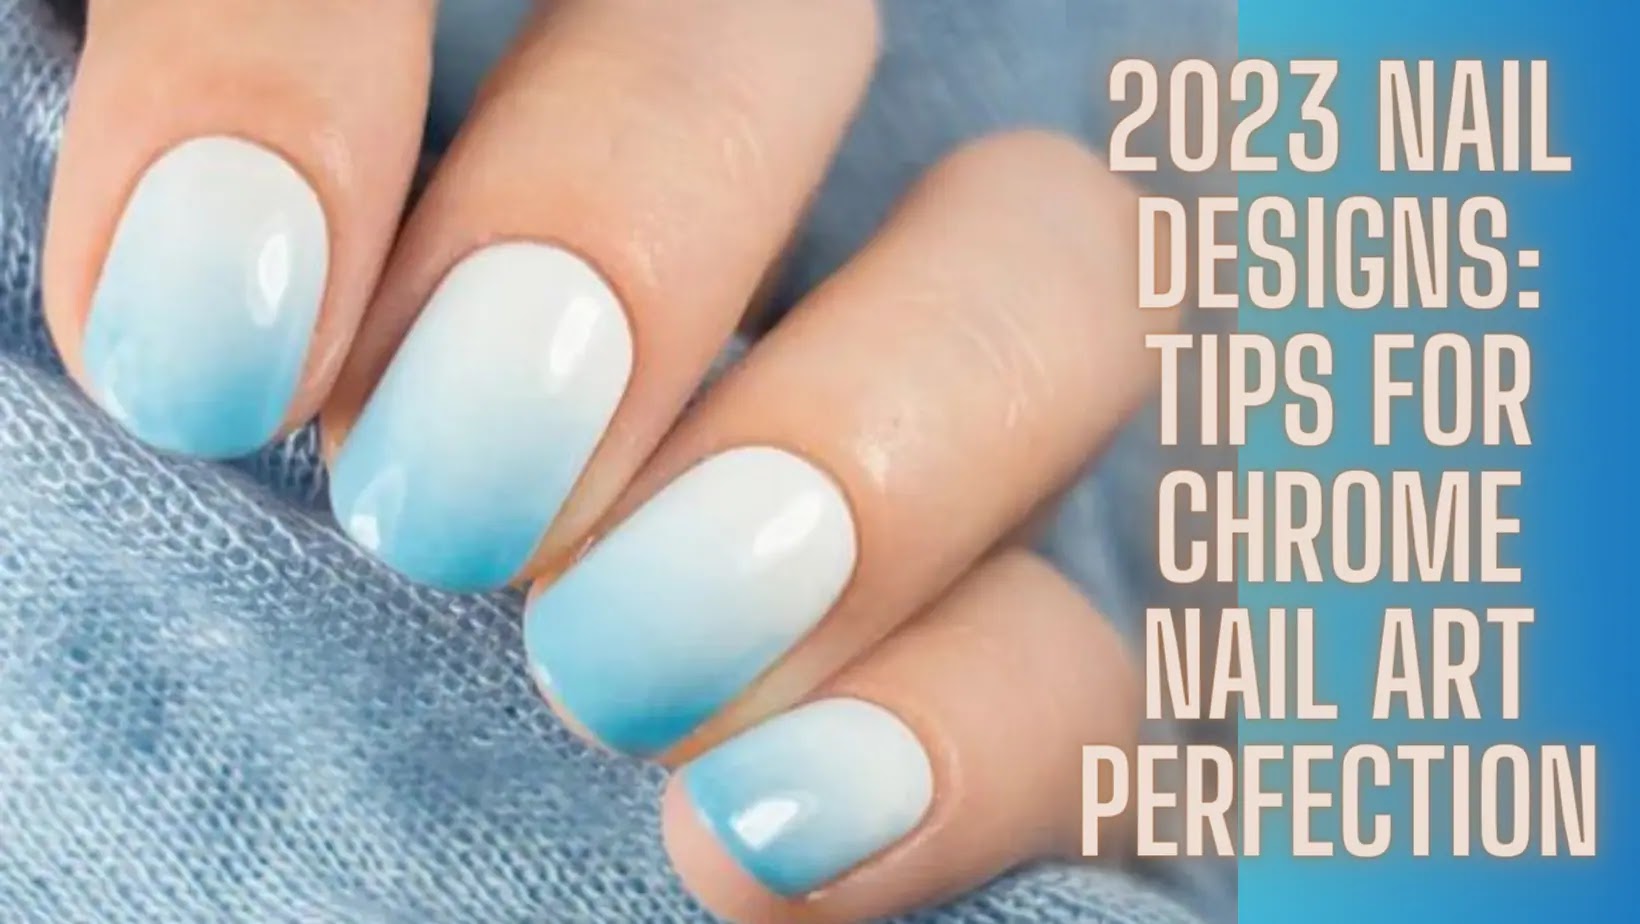 4. Step-by-Step Guide to Achieving a Chrome Nail Art Effect - wide 6